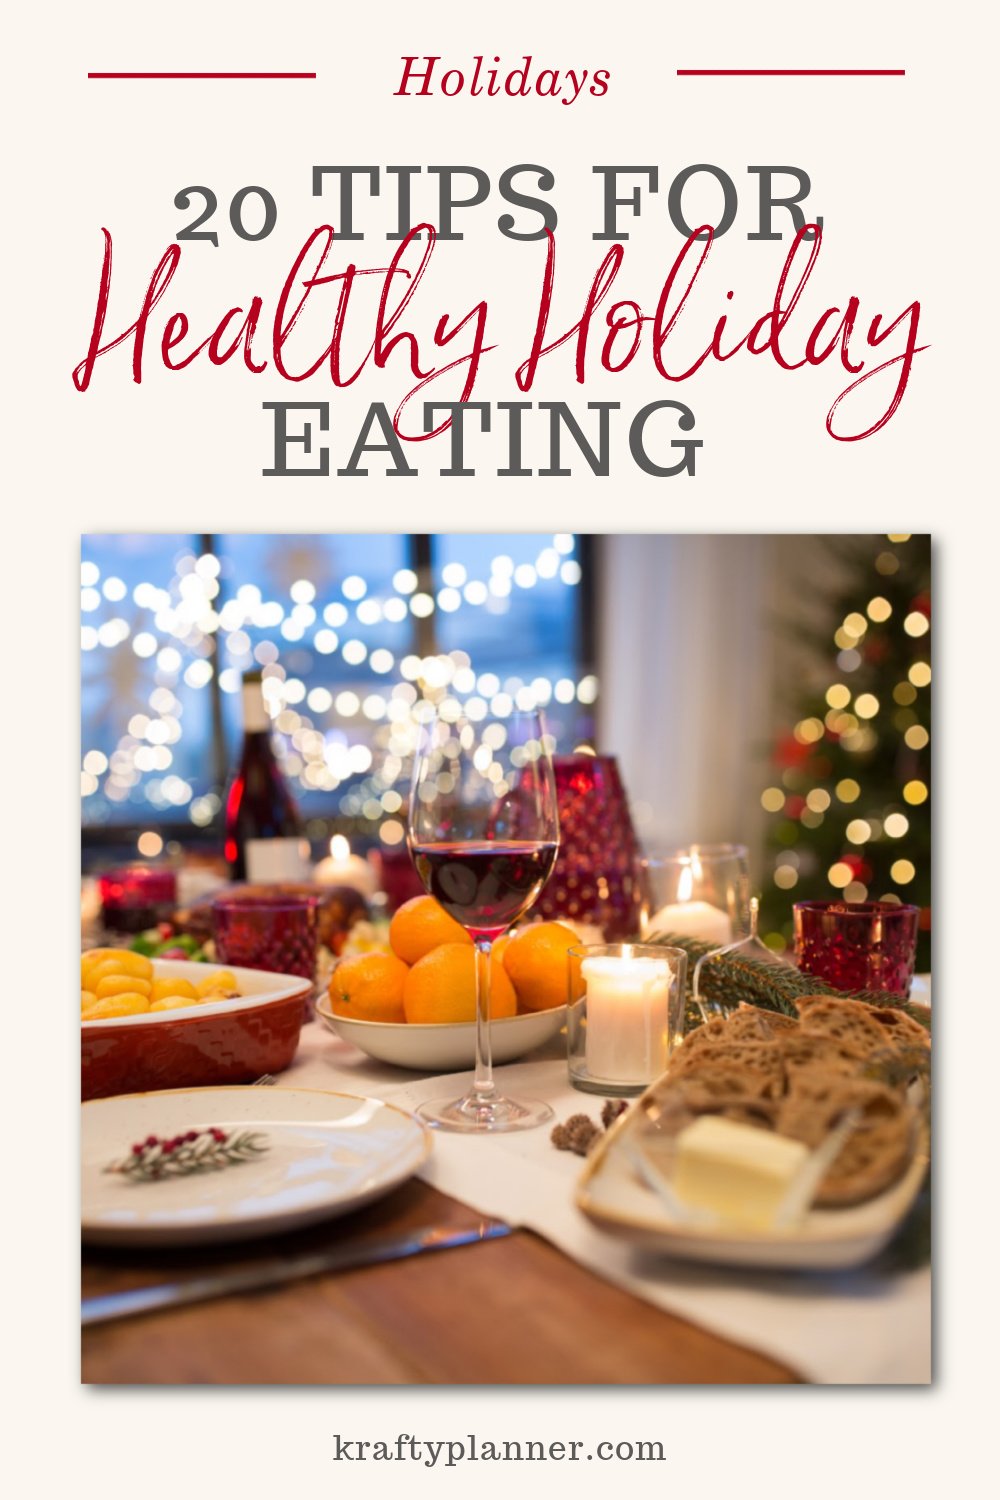 20 Tips for Healthy Holiday Eating